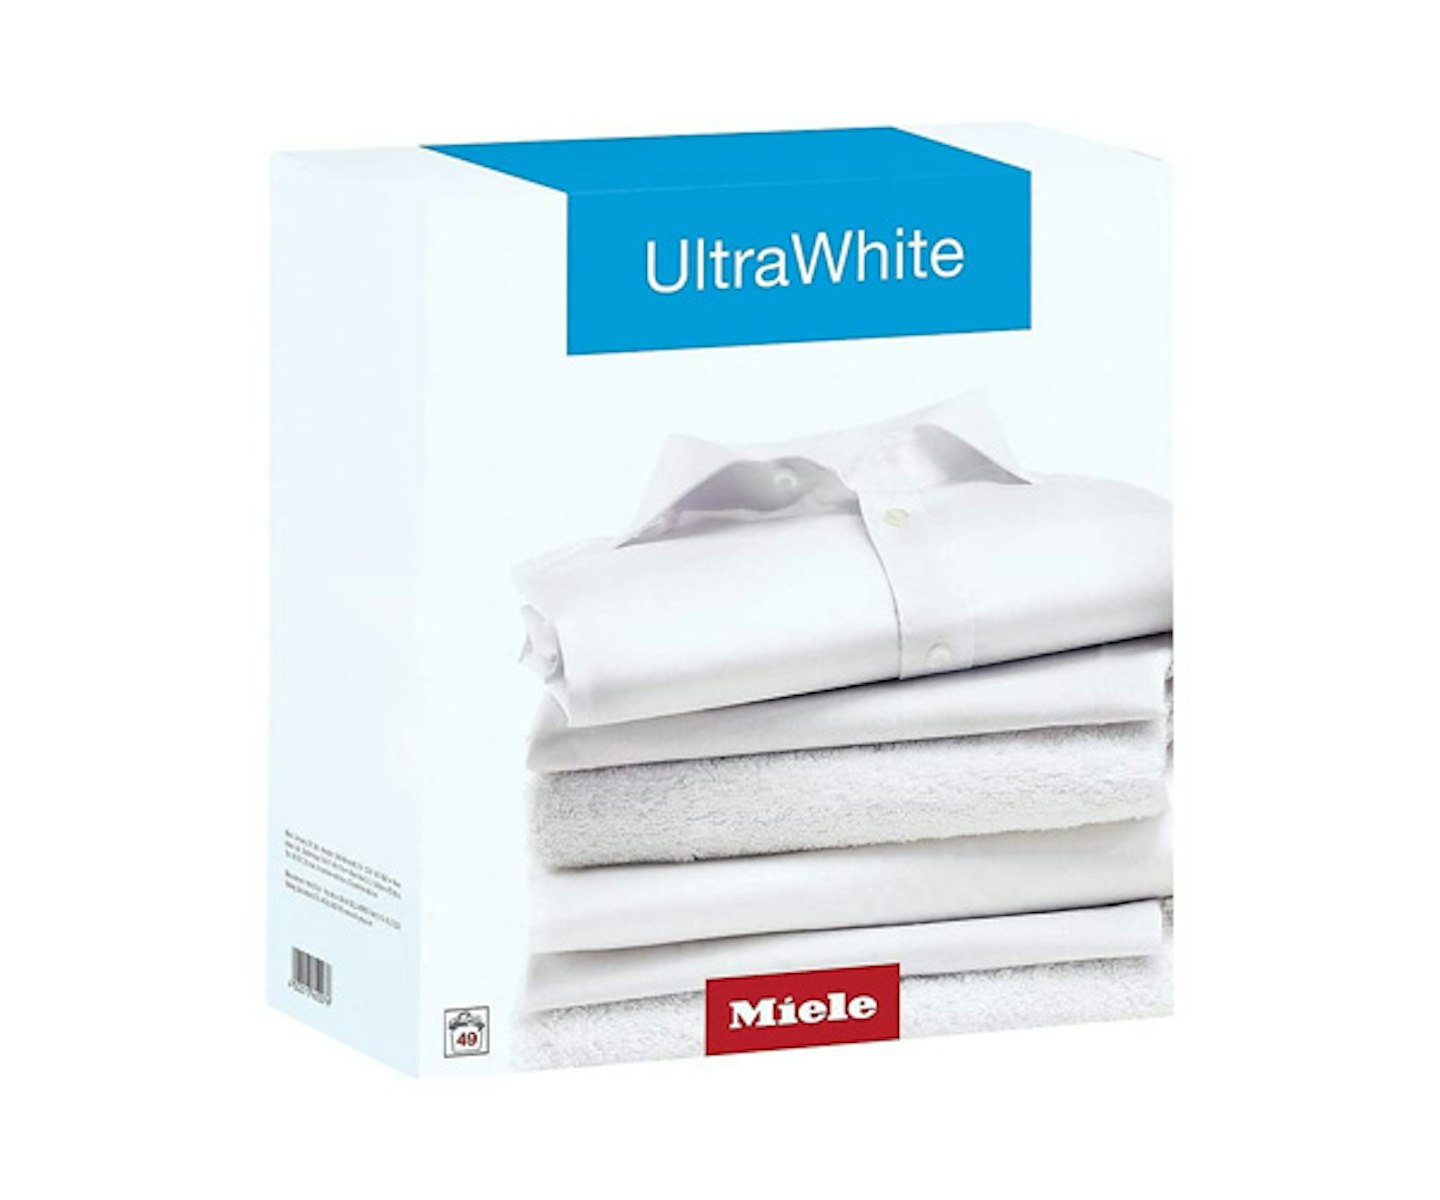 Miele UltraWhite Powder Detergent for Laundry